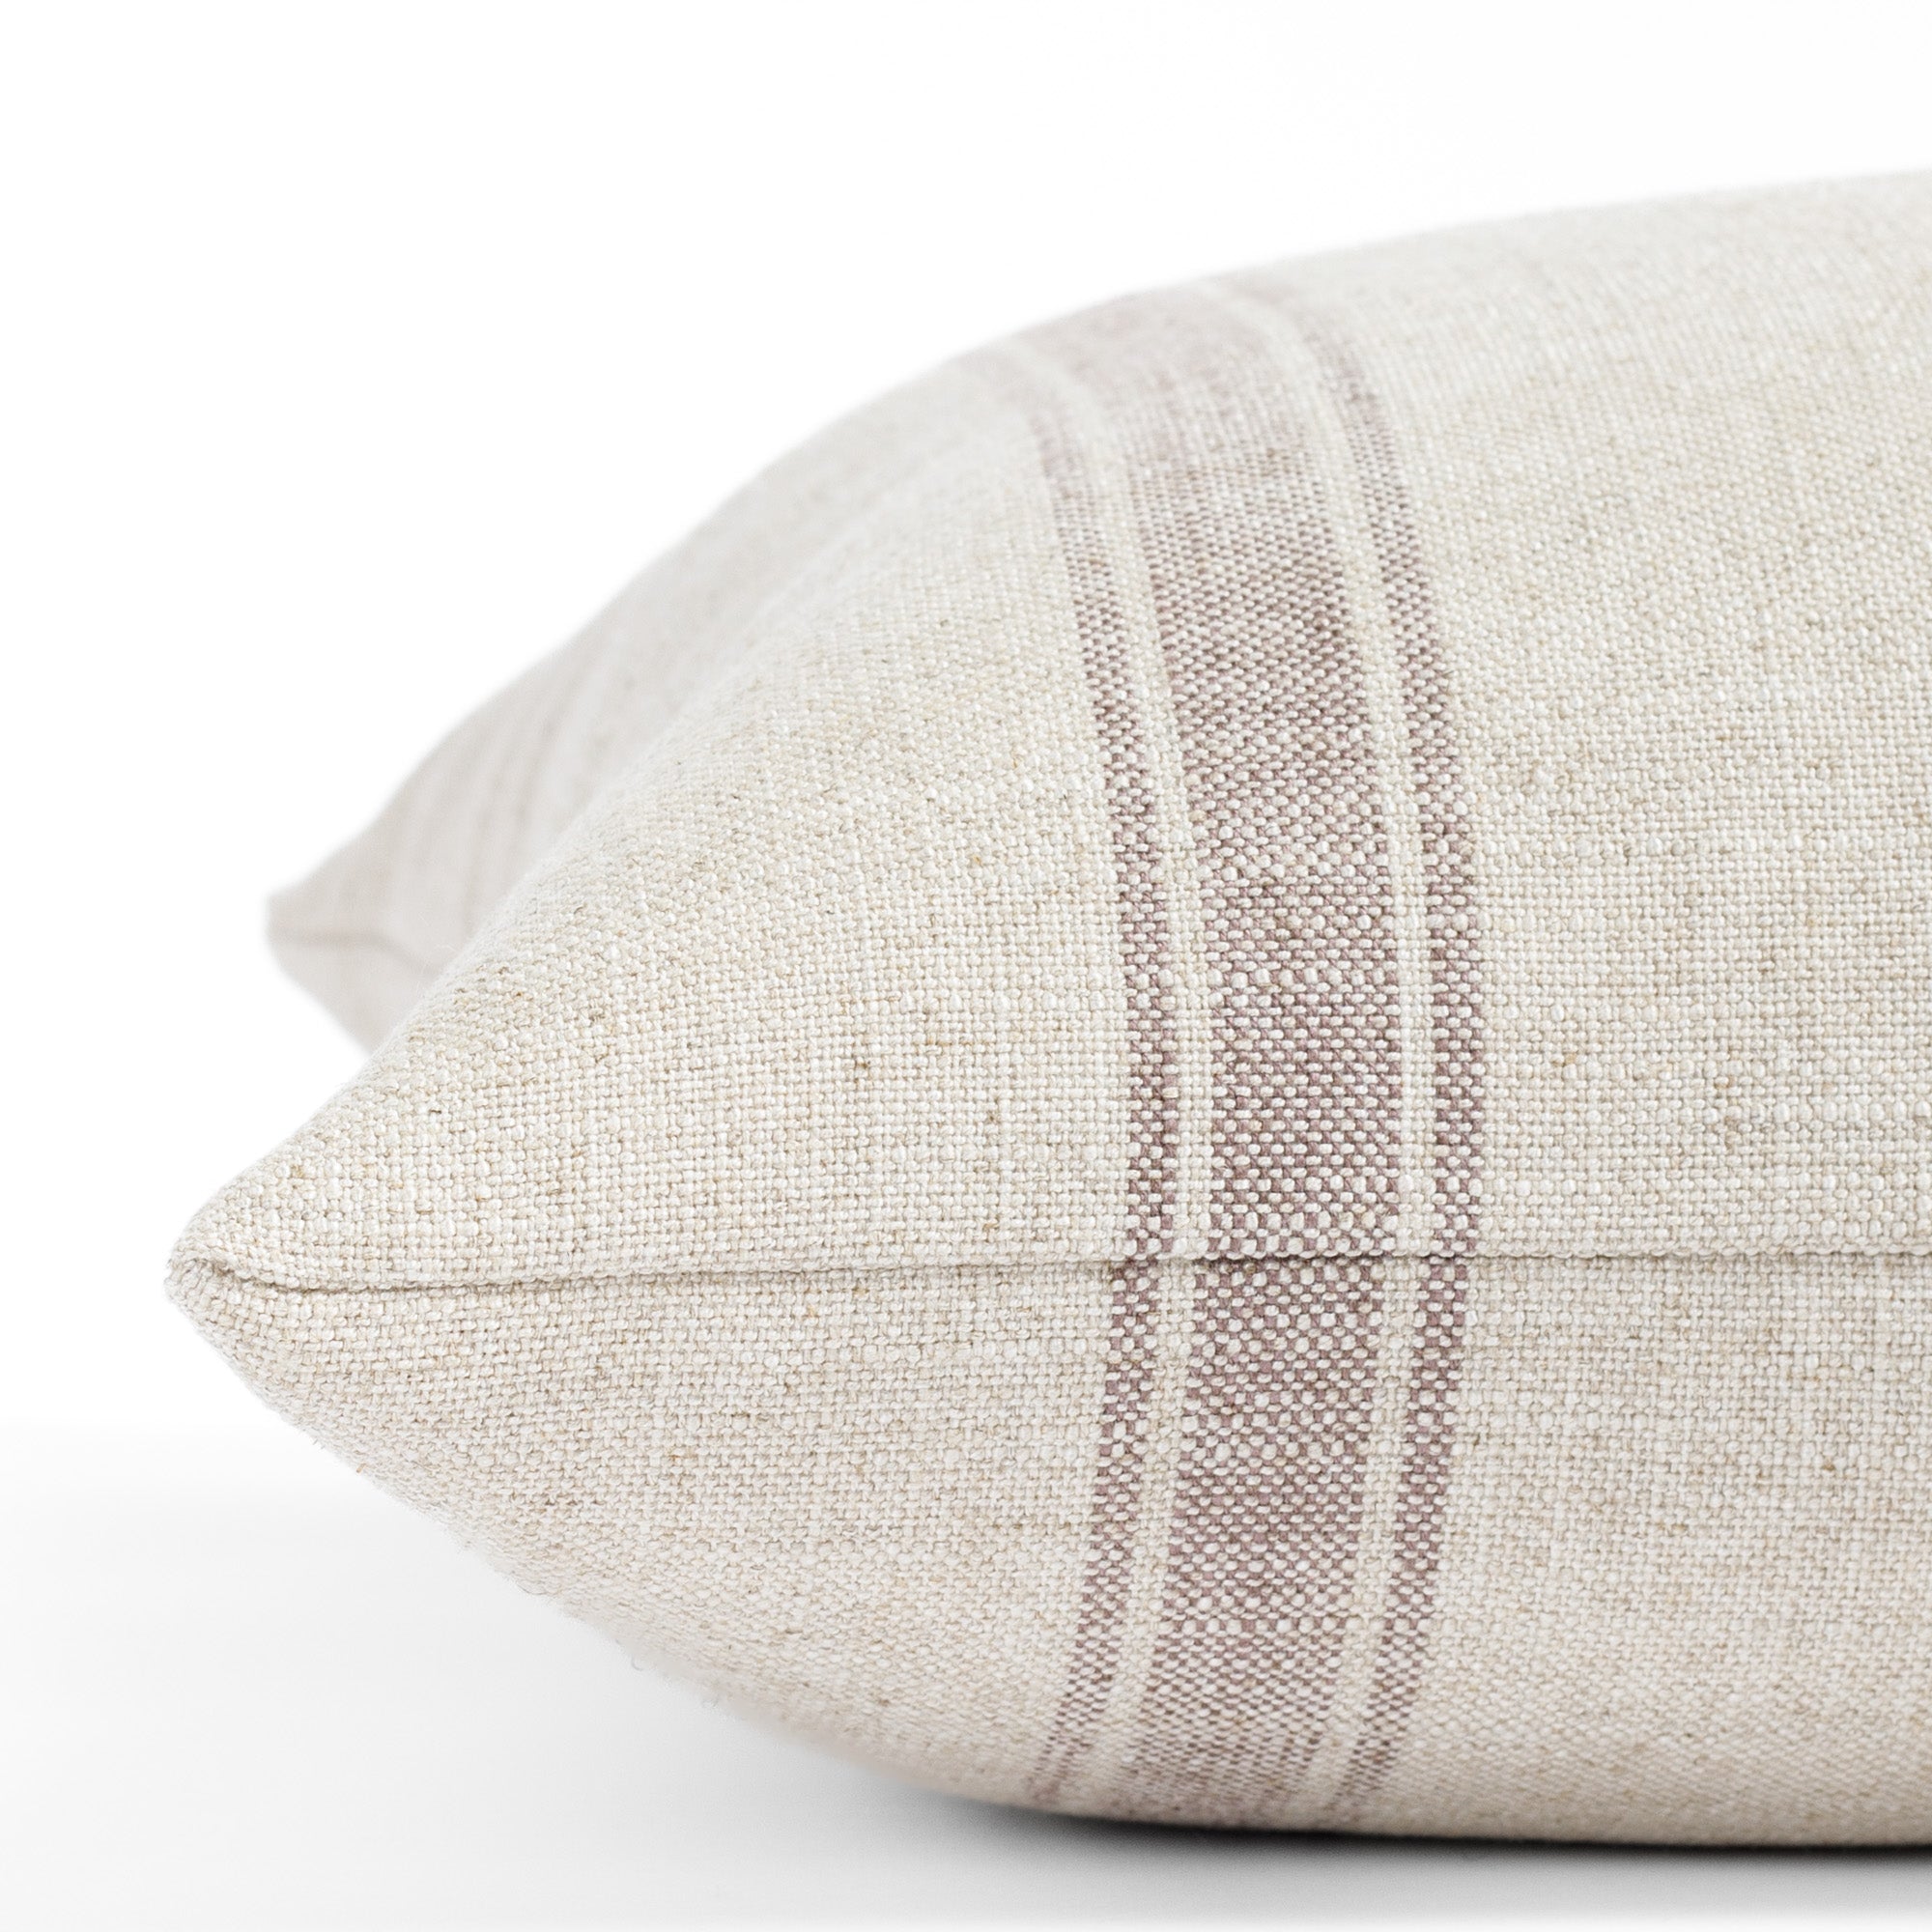 a soft purple and oatmeal striped throw pillow : close up side view